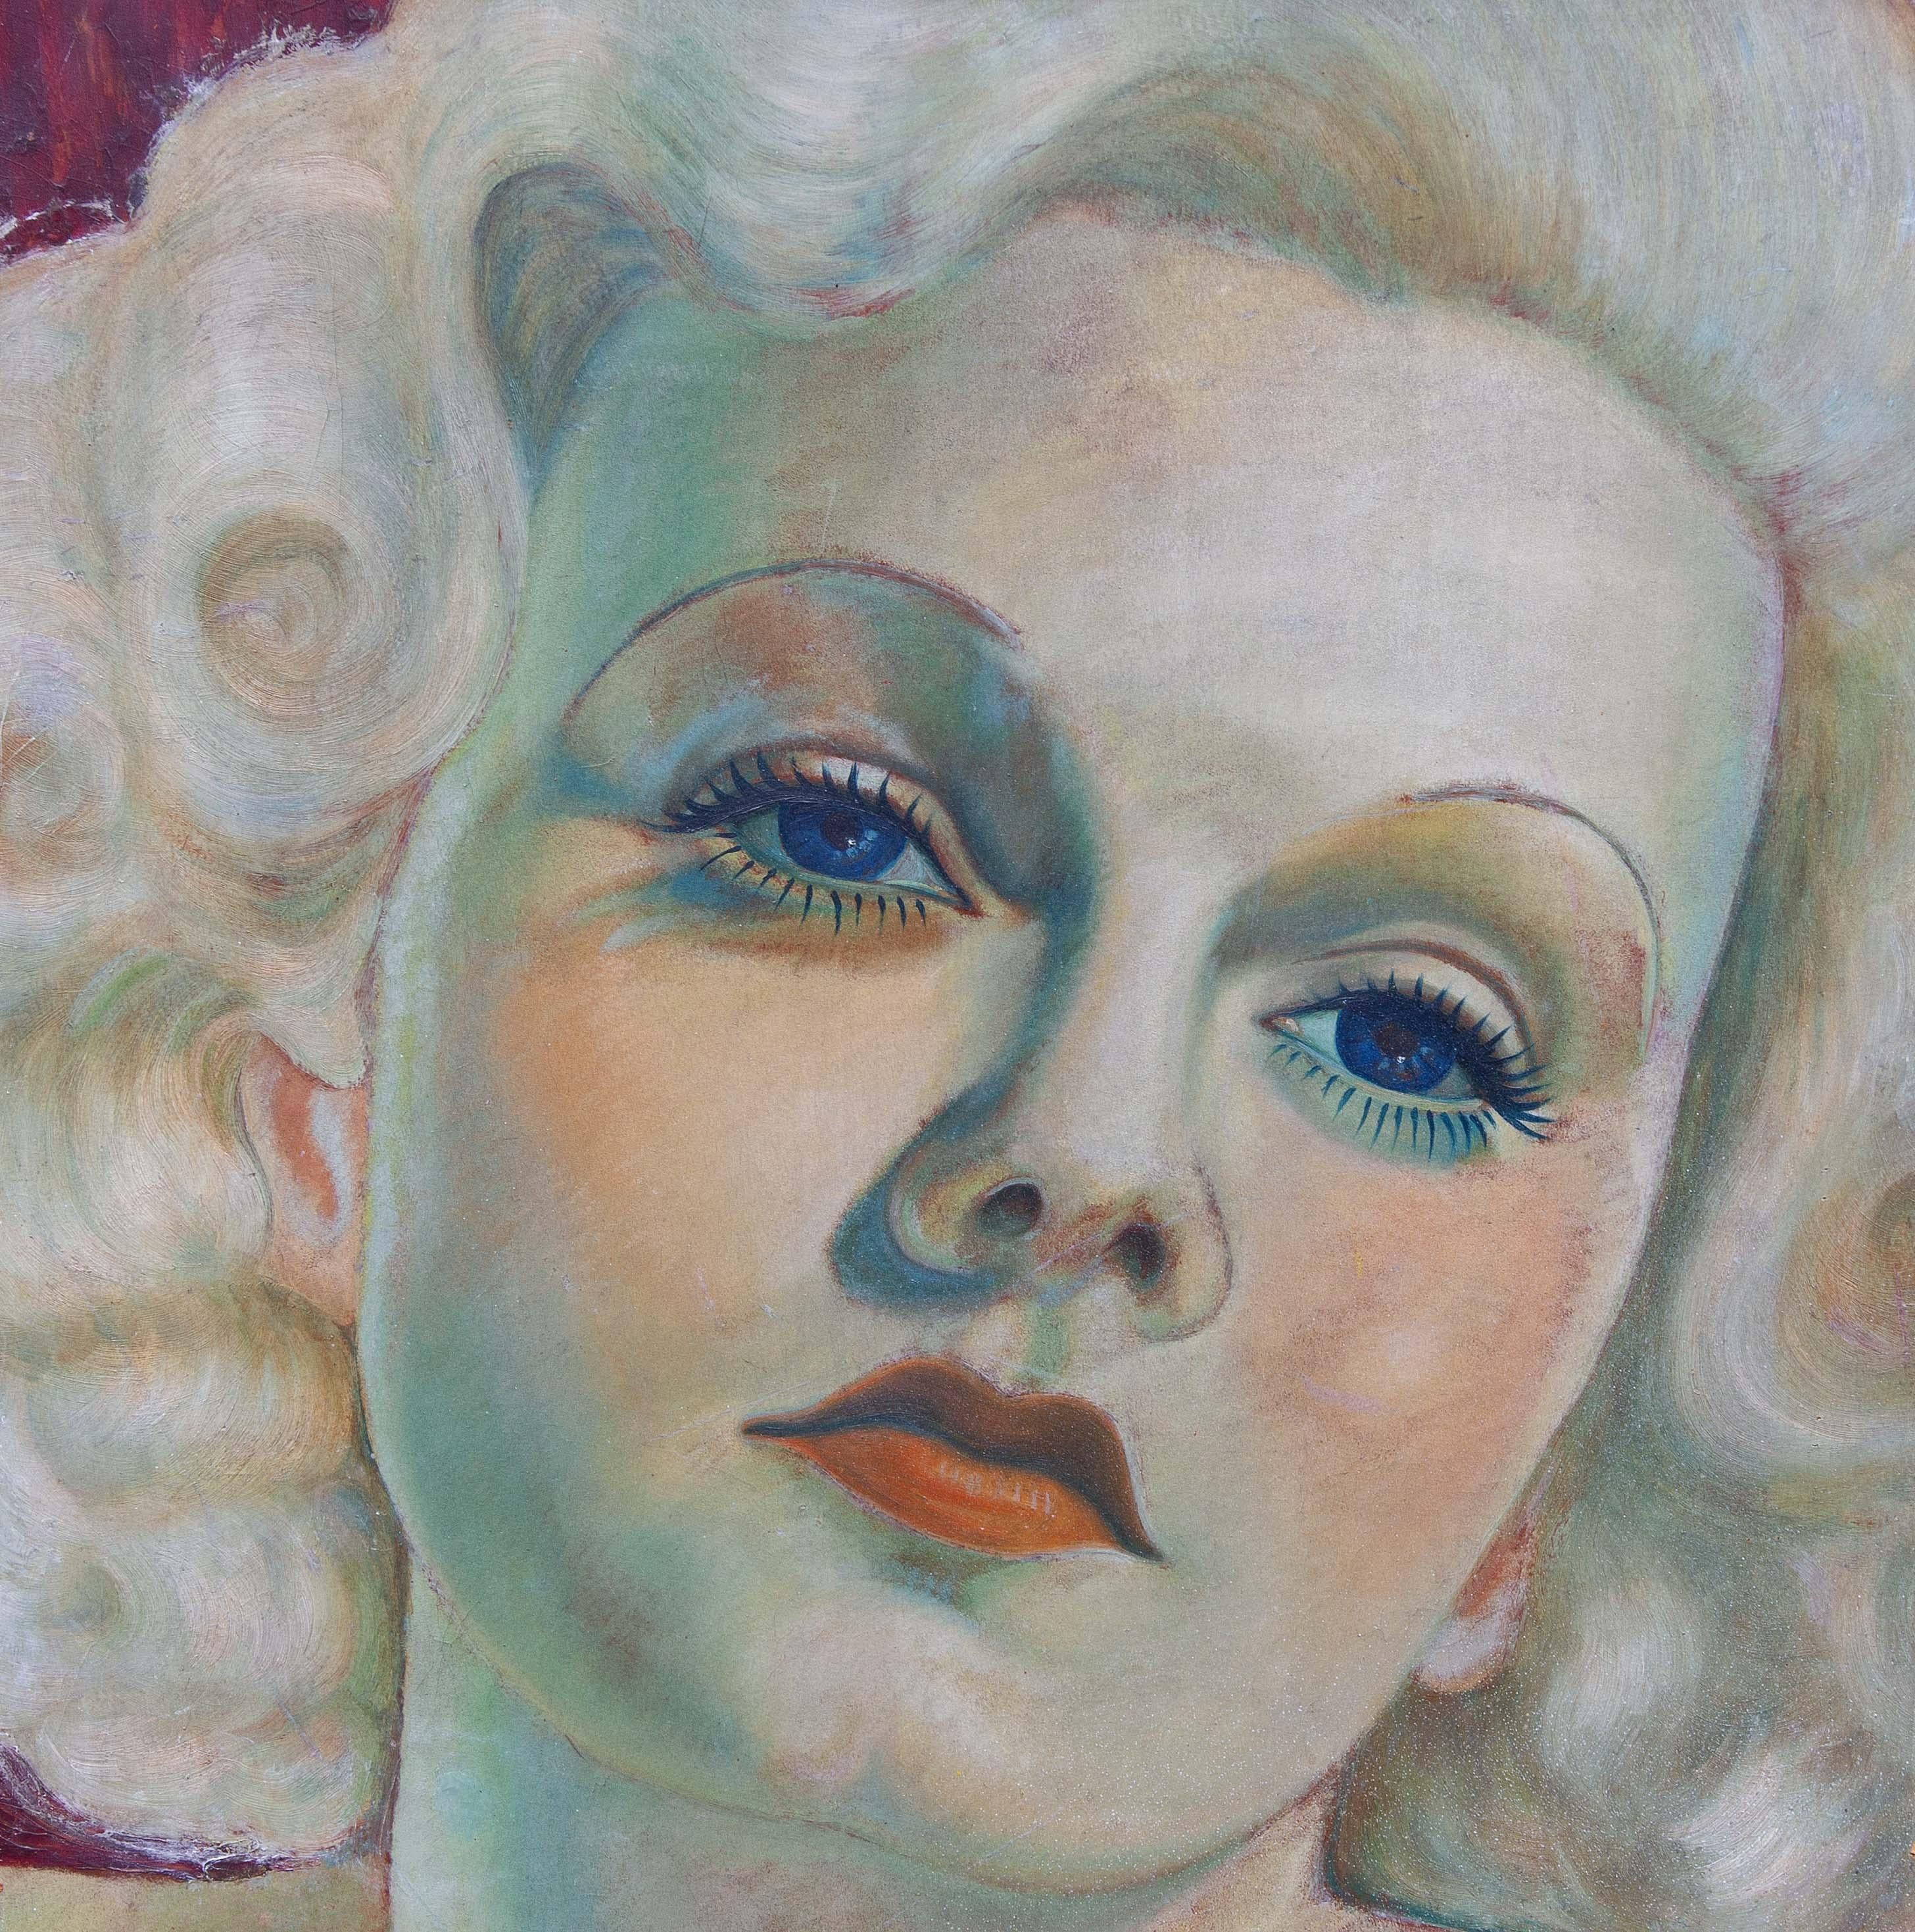 Vintage portrait of Jean Harlow. Oil on board. Dated 1938. The best of Hollywood Regency . Faint illegible signature lower right. Harlow died in in 1937. This was painted the following year. Likely to honor the the young starlet.
Jean Harlow was an